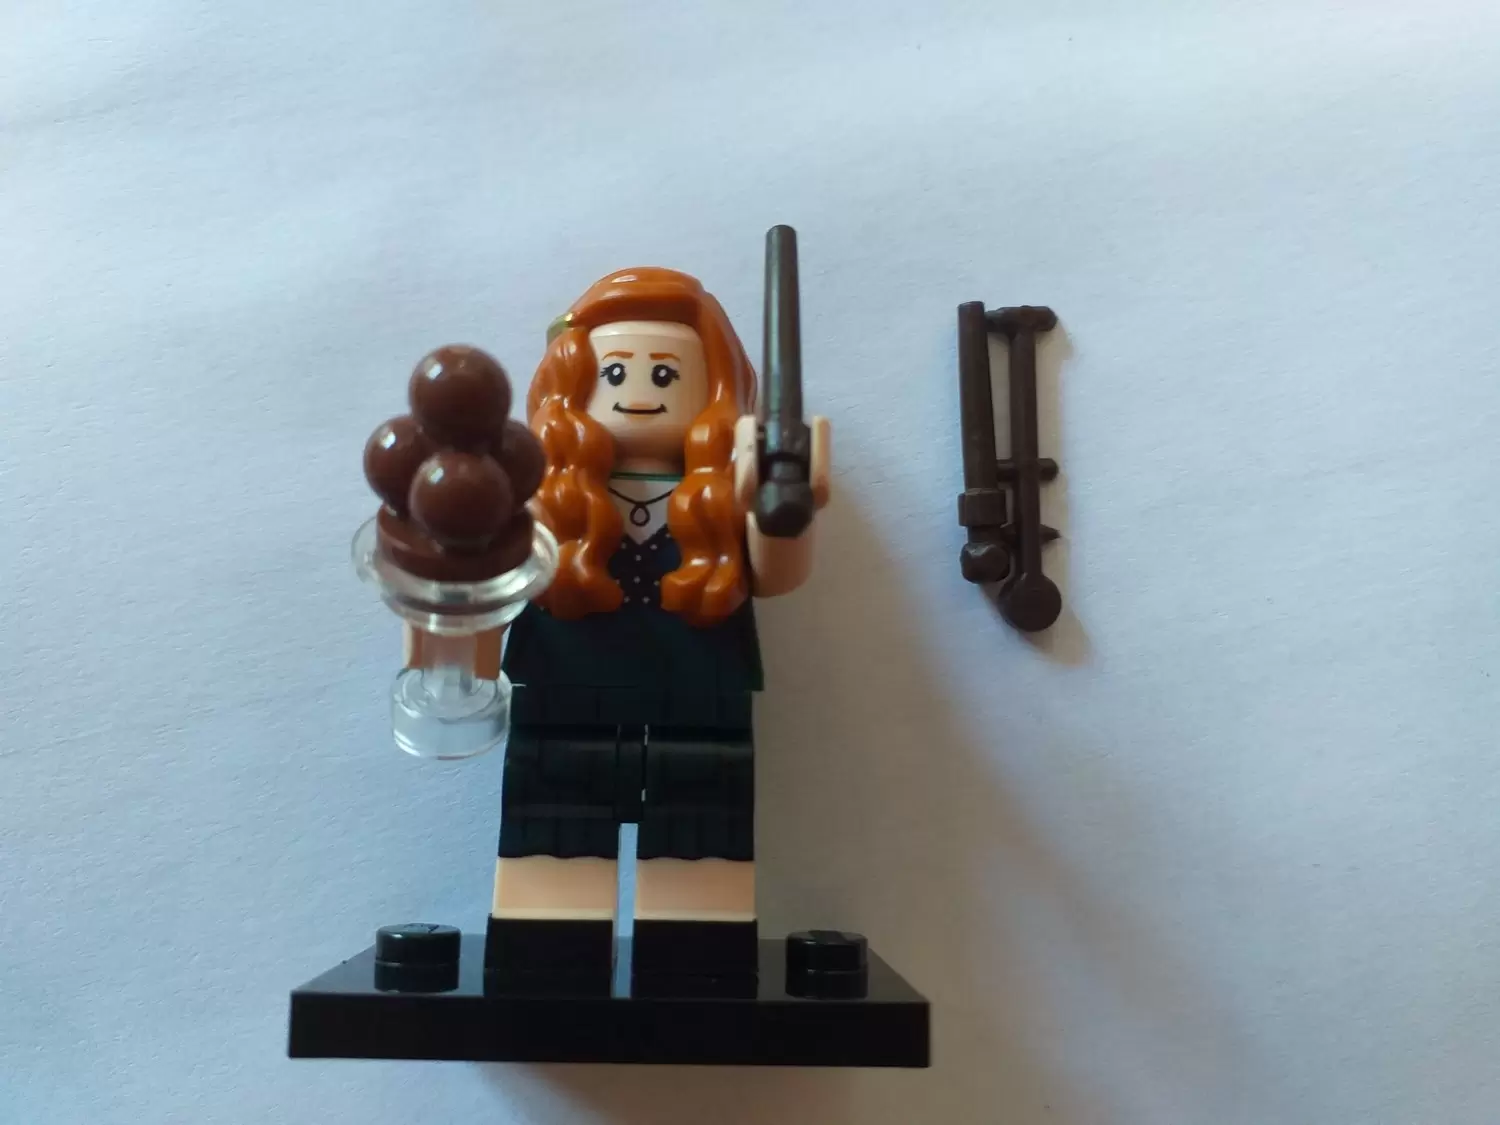 LEGO Minifigures : Wizarding World of Harry Potter Series 2 - Ginny Weasley with chocolate sundae